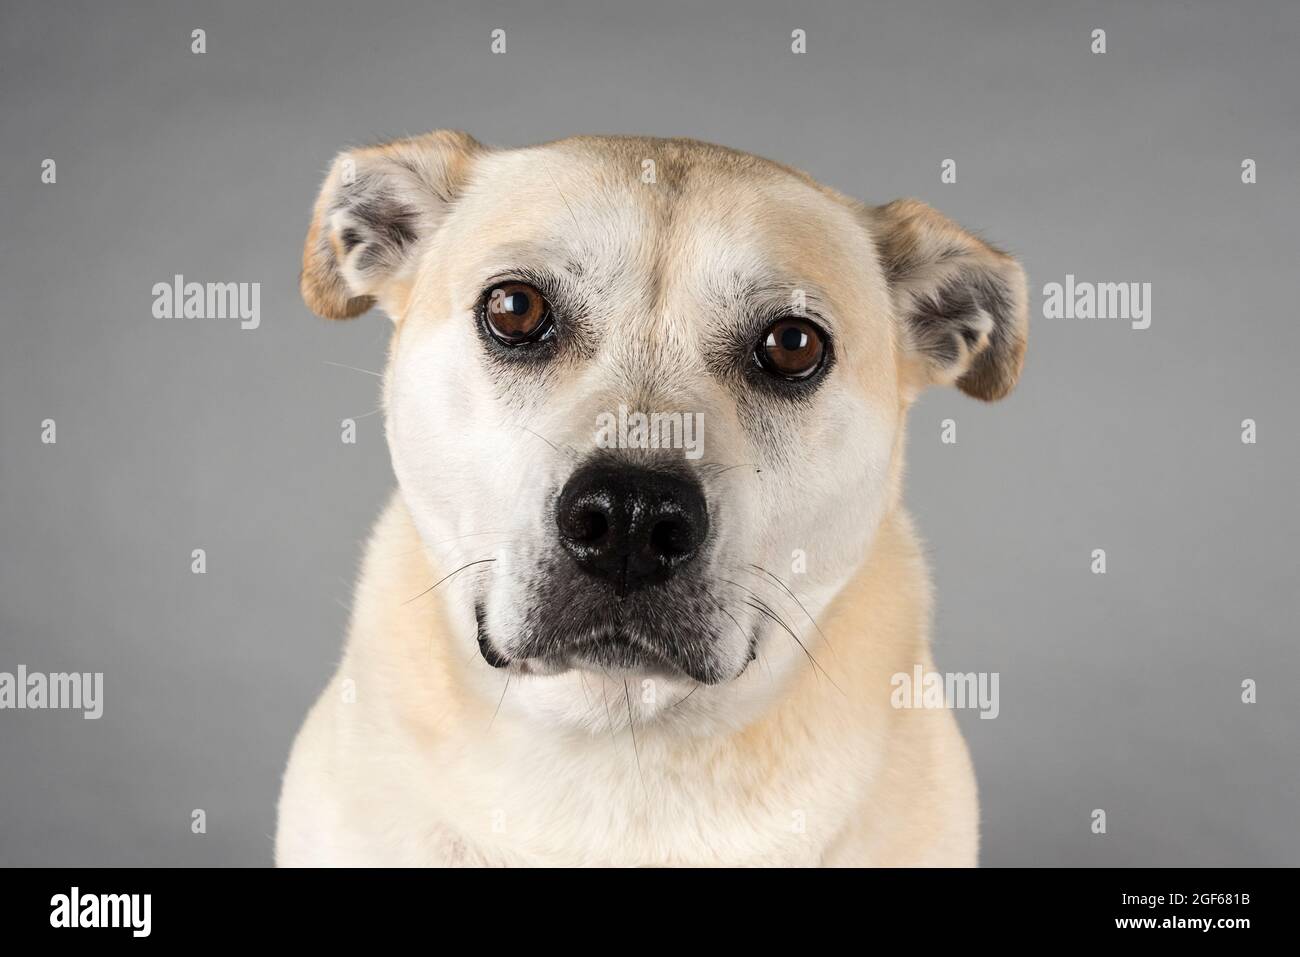 Portrait of a dog against a grey studio background. Stock Photo